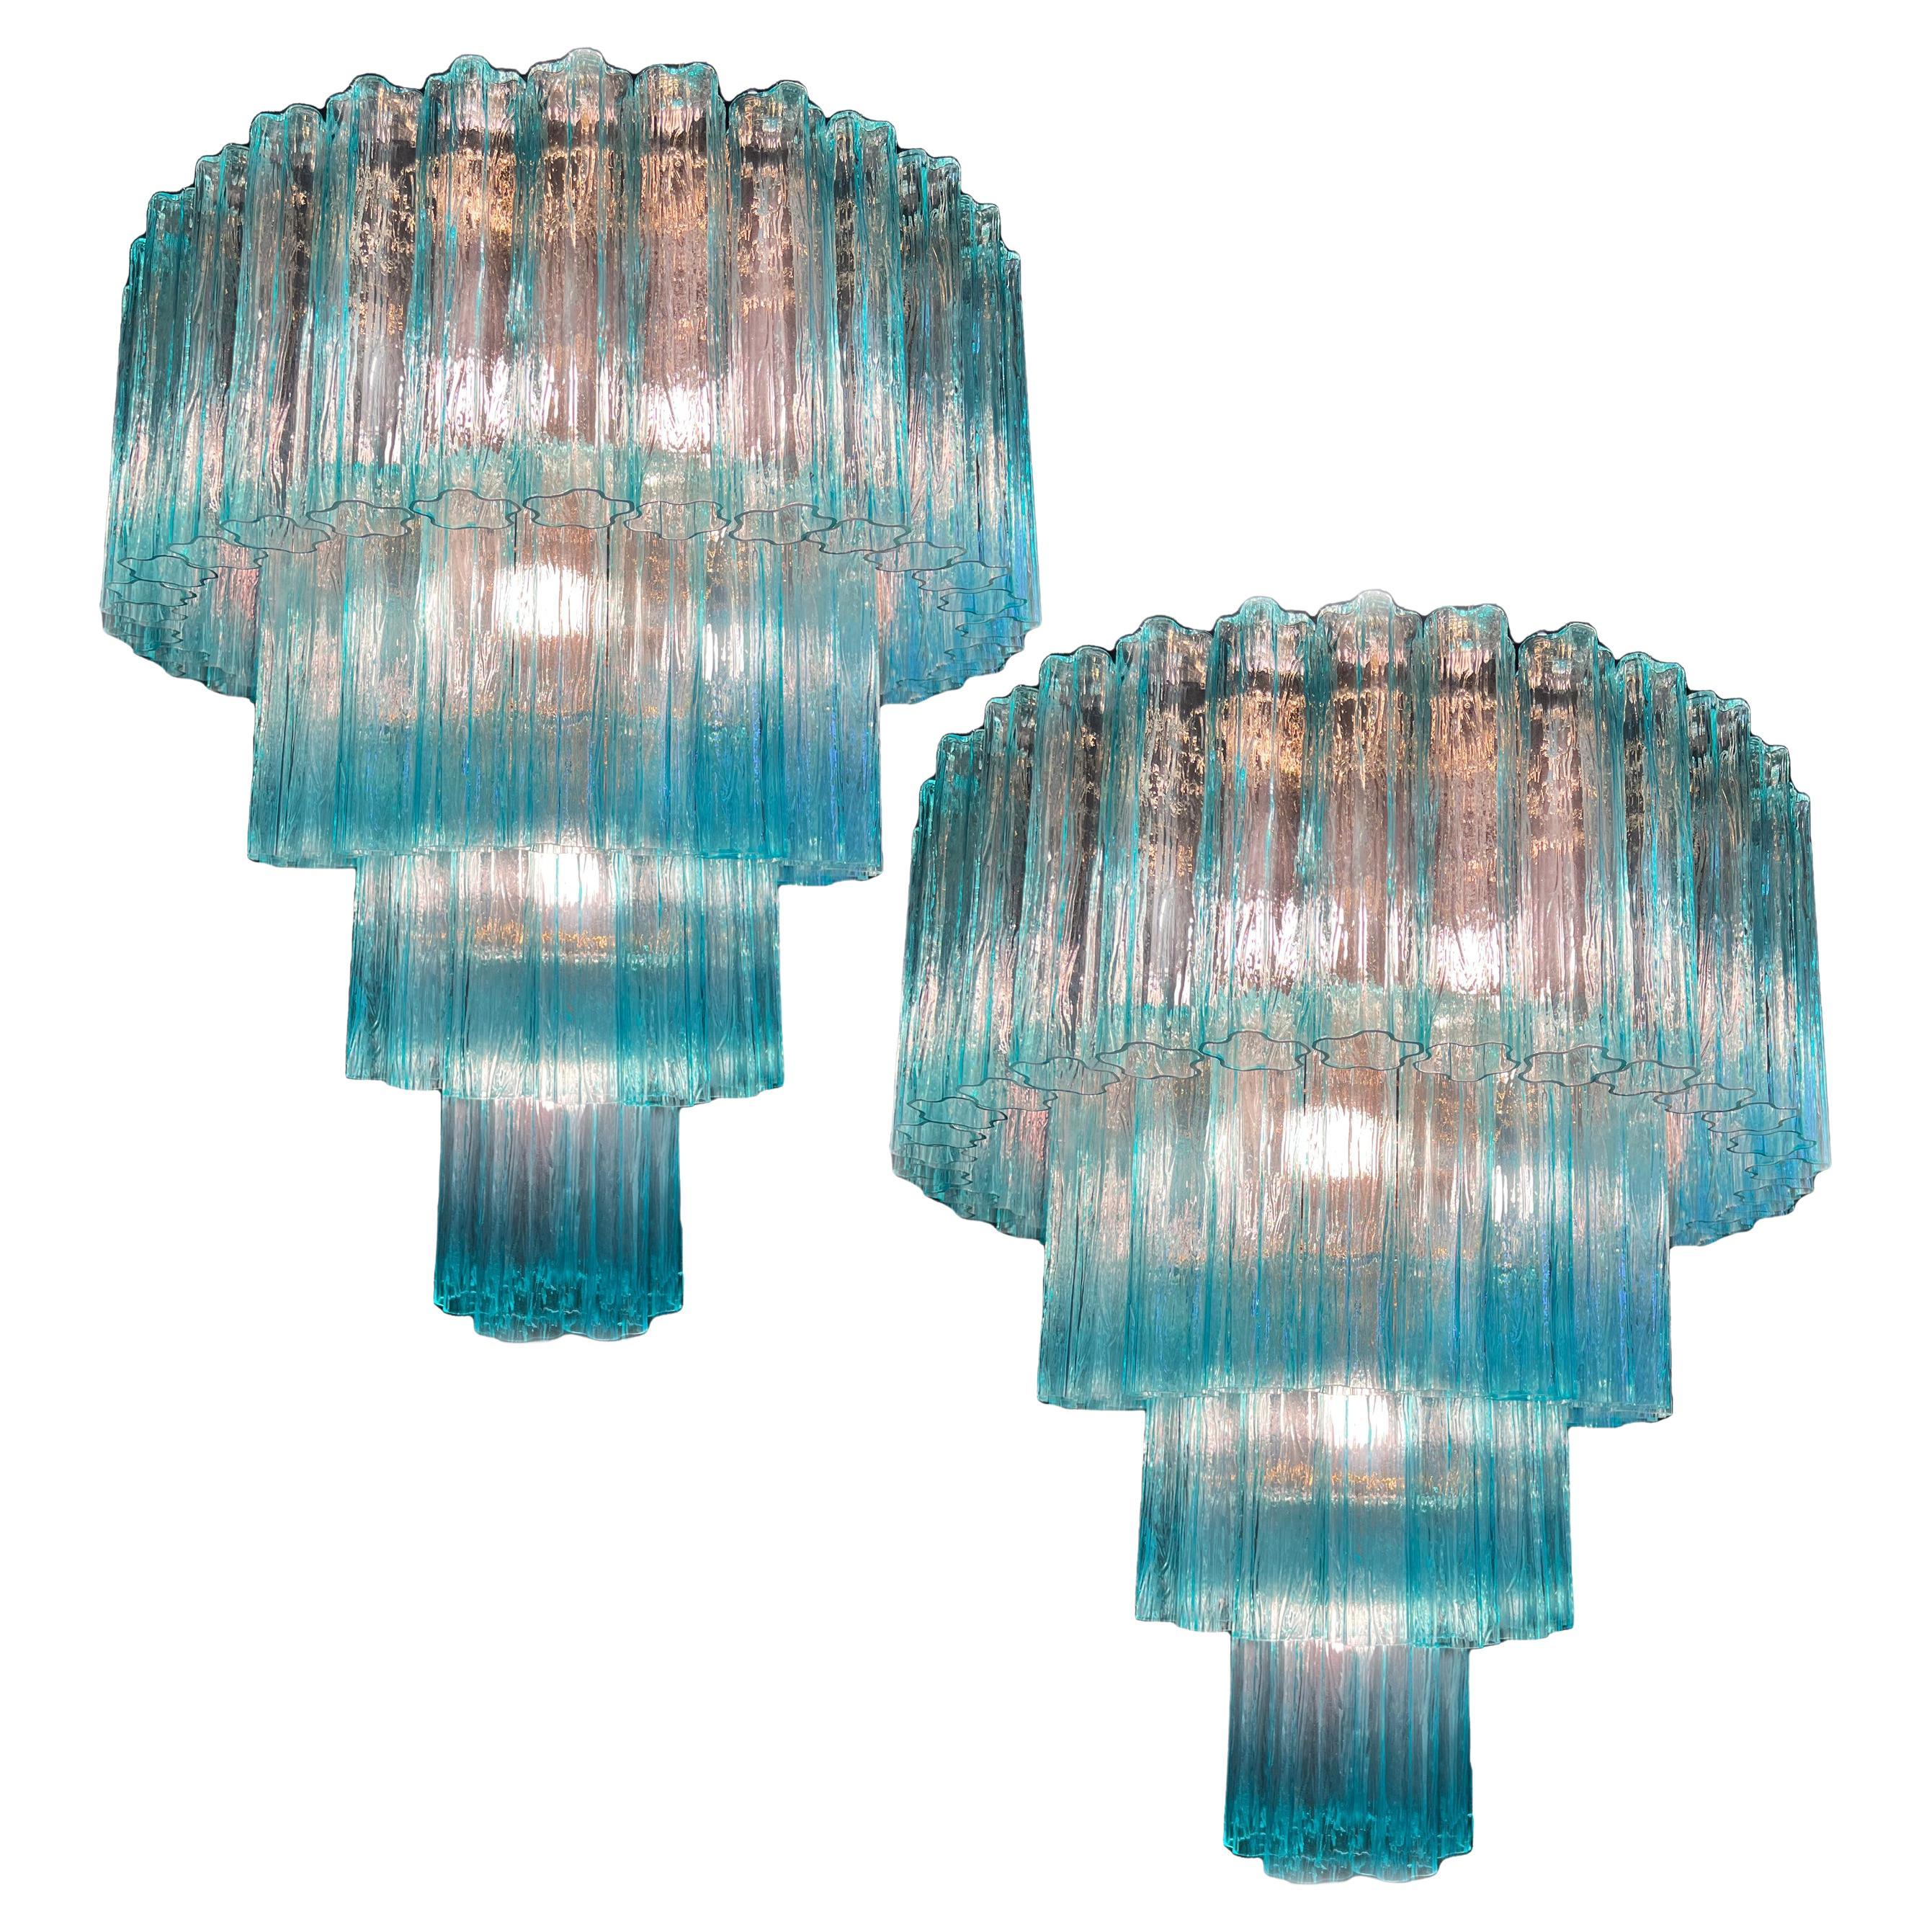 Chandelier of refined elegance. The blue hues reflect the light harmoniously. Made of pure Murano glass elements. A larger version is also available. Also available for 220 volts outside the USA.